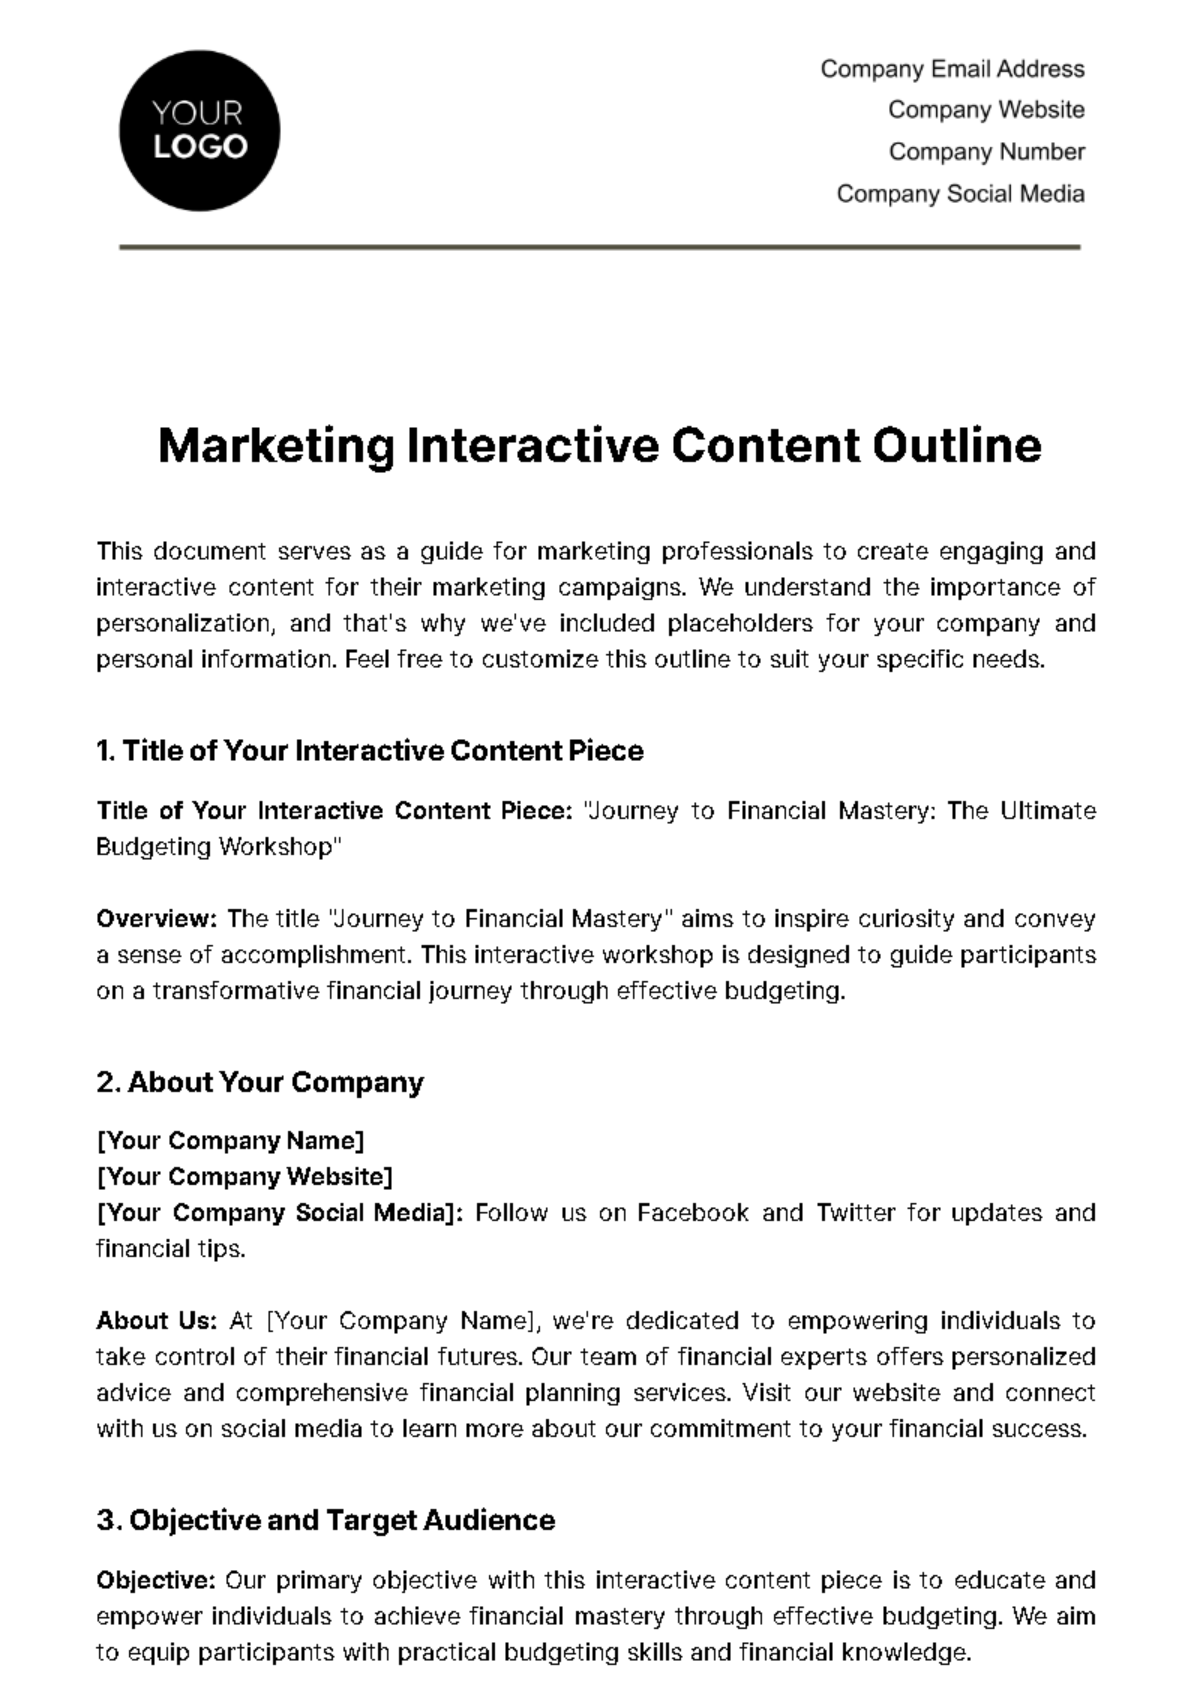 Free Marketing Interactive Content Outline Template